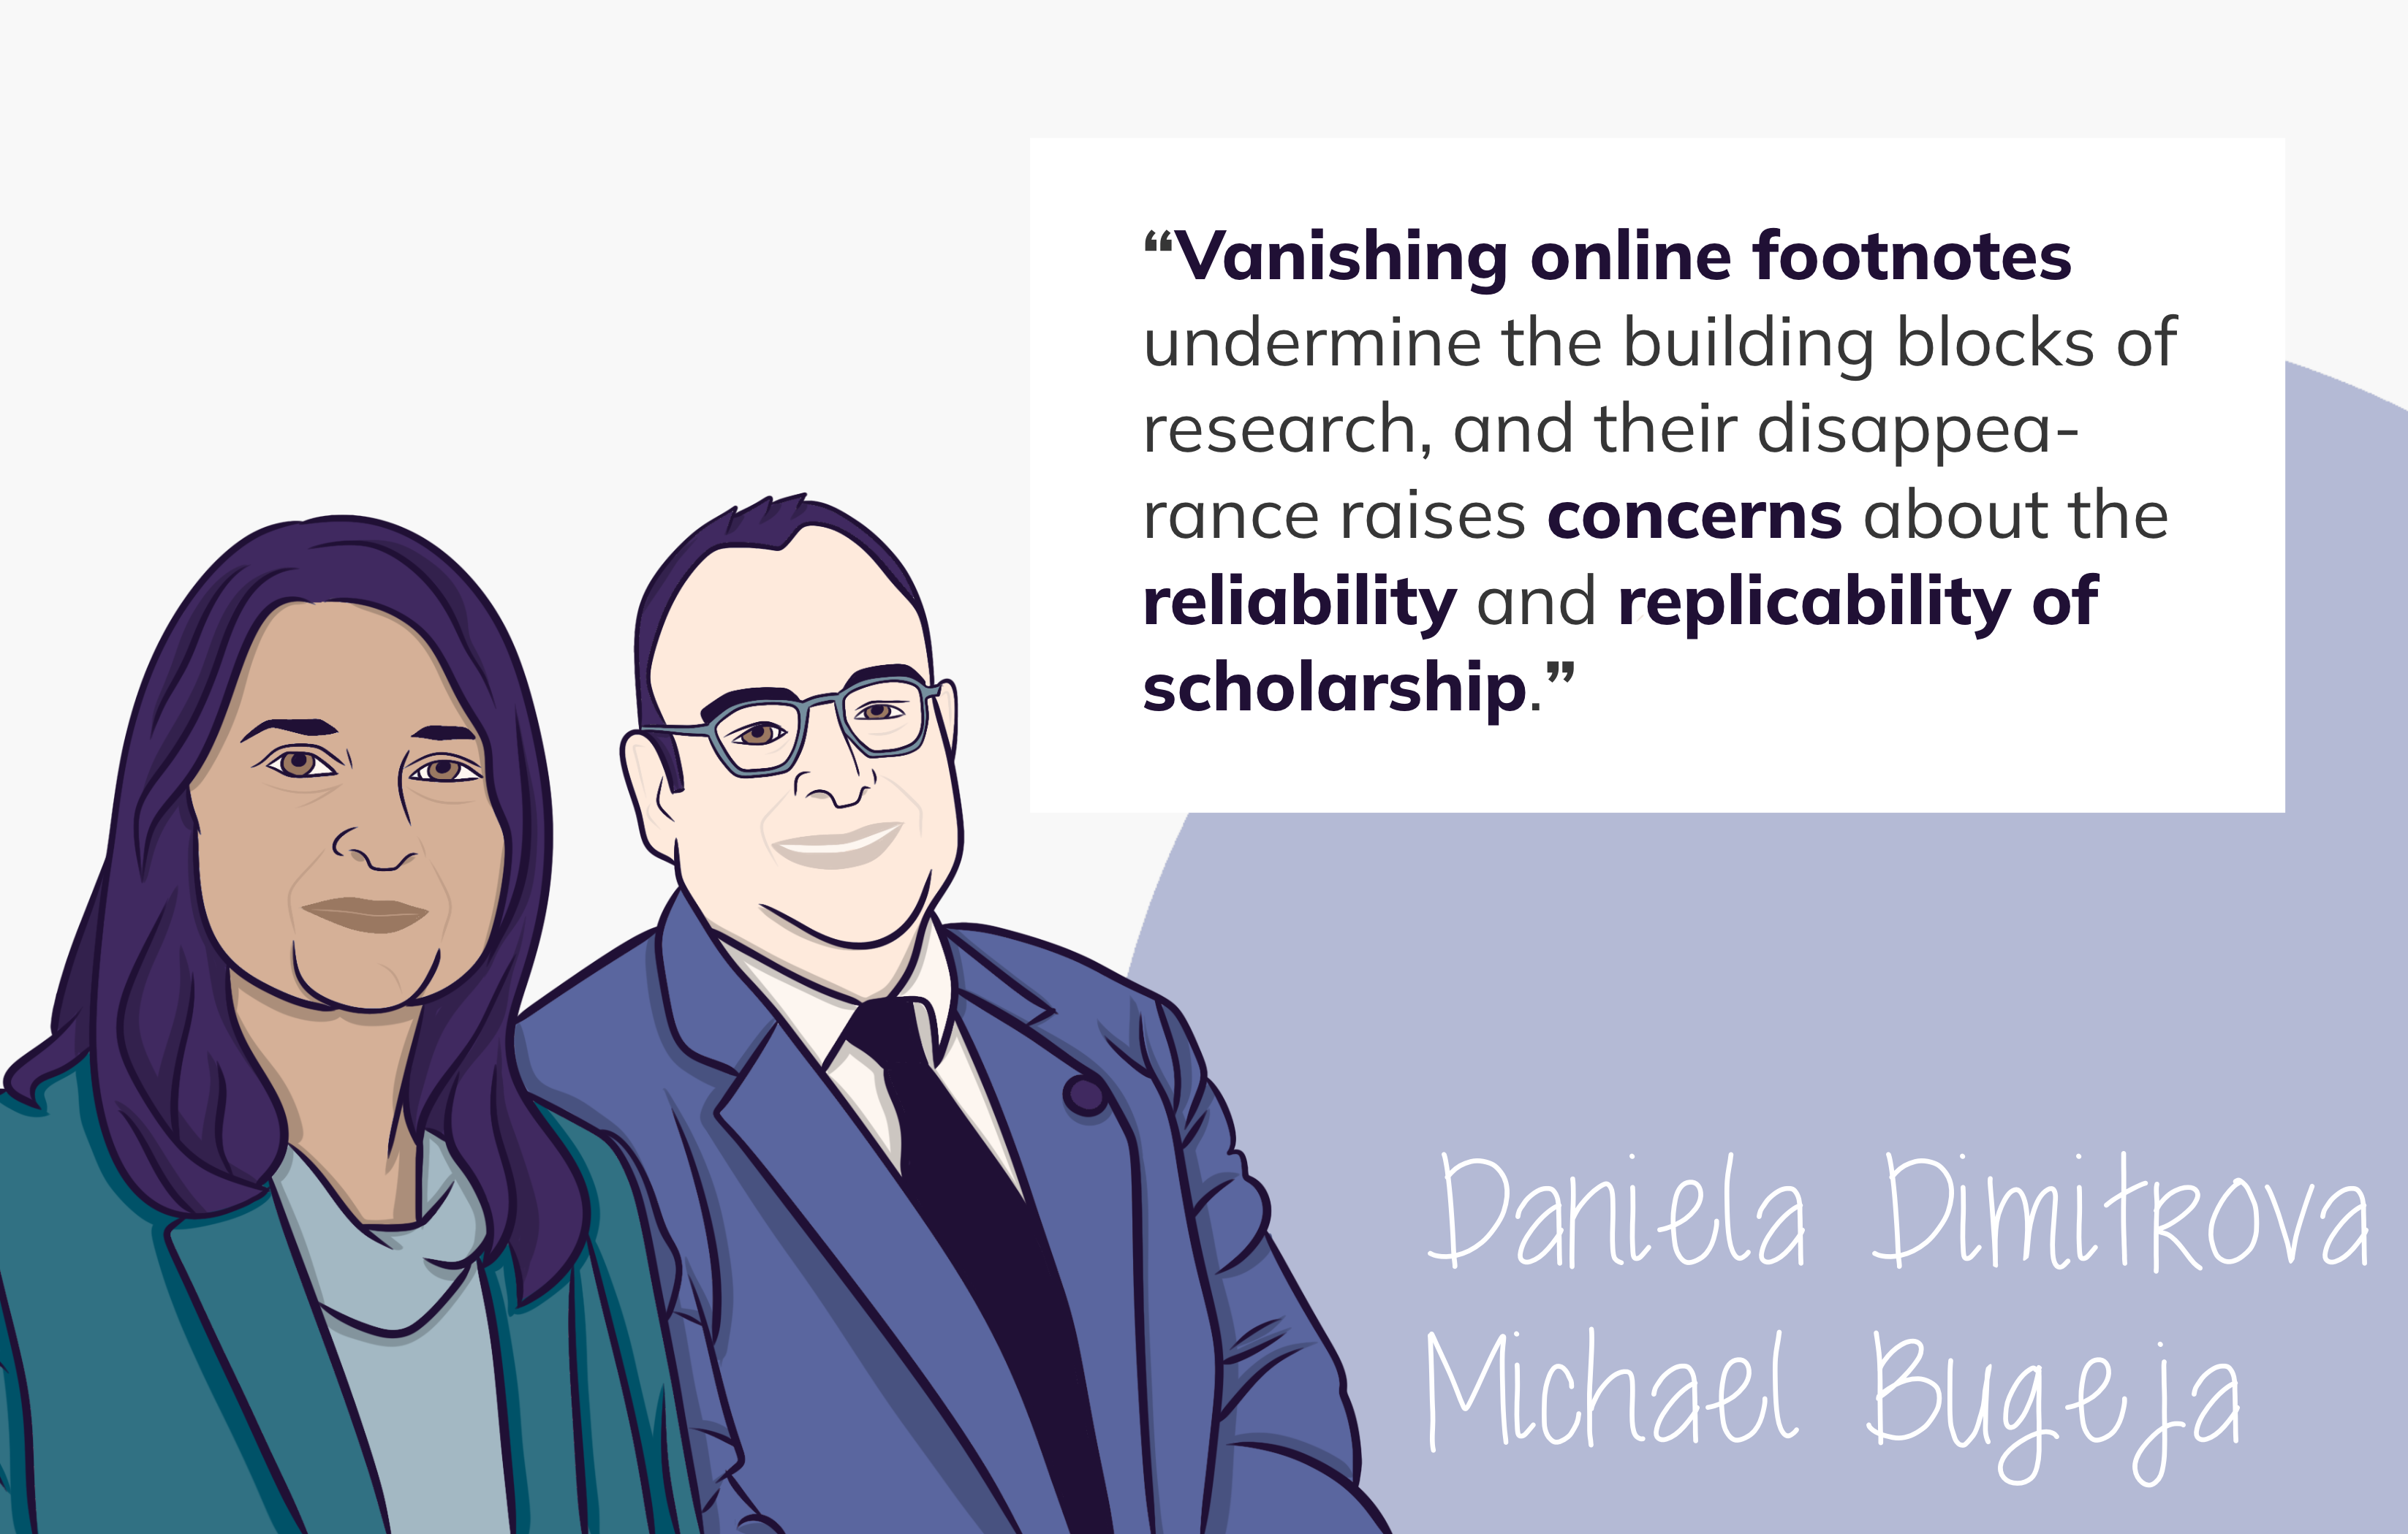 Quote from the Book Vanishing Act: The Erosion of Online Footnotes and Implications for Schlolarship in the Digital Age by Daniela Dimitrova and Michael Bugeja, saying 'Vanishing online footnotes undermine the building blocks of research, and their disappearance raises concerns about the reliability and replicability of scholarship.'